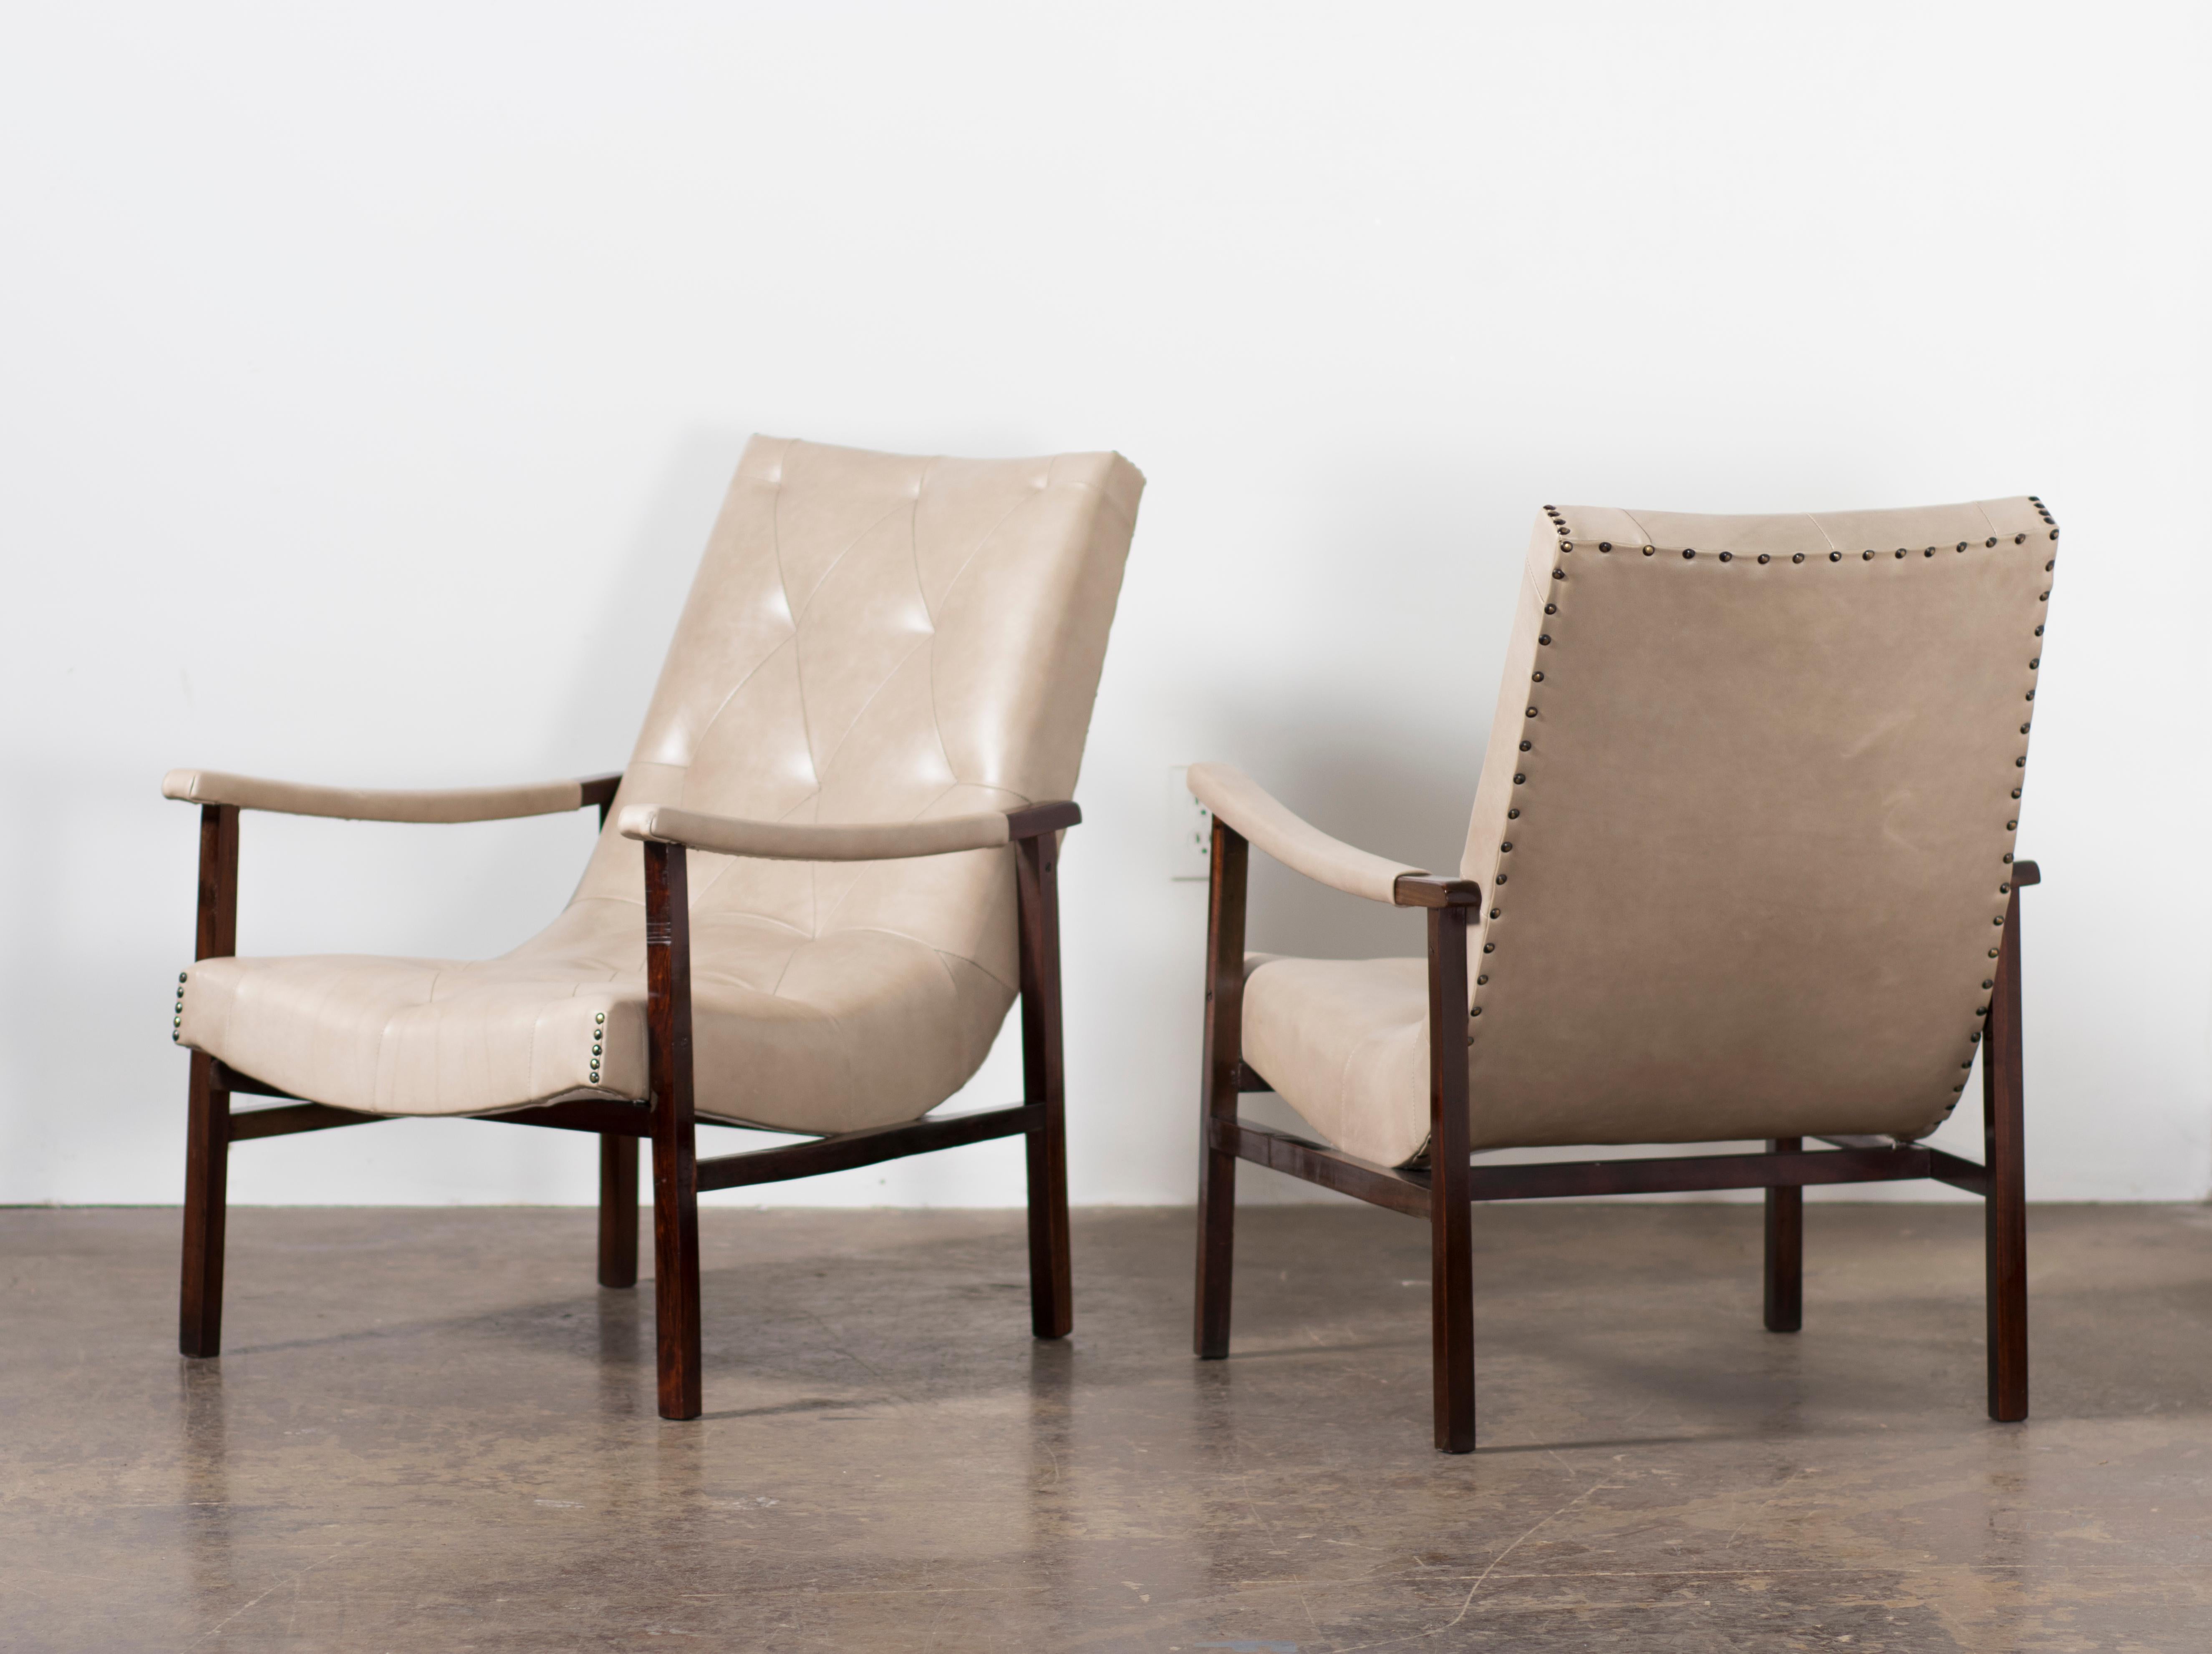 Pair of Modern Brazilian Rosewood Armchairs by Gelli, circa the 1950s For Sale 7